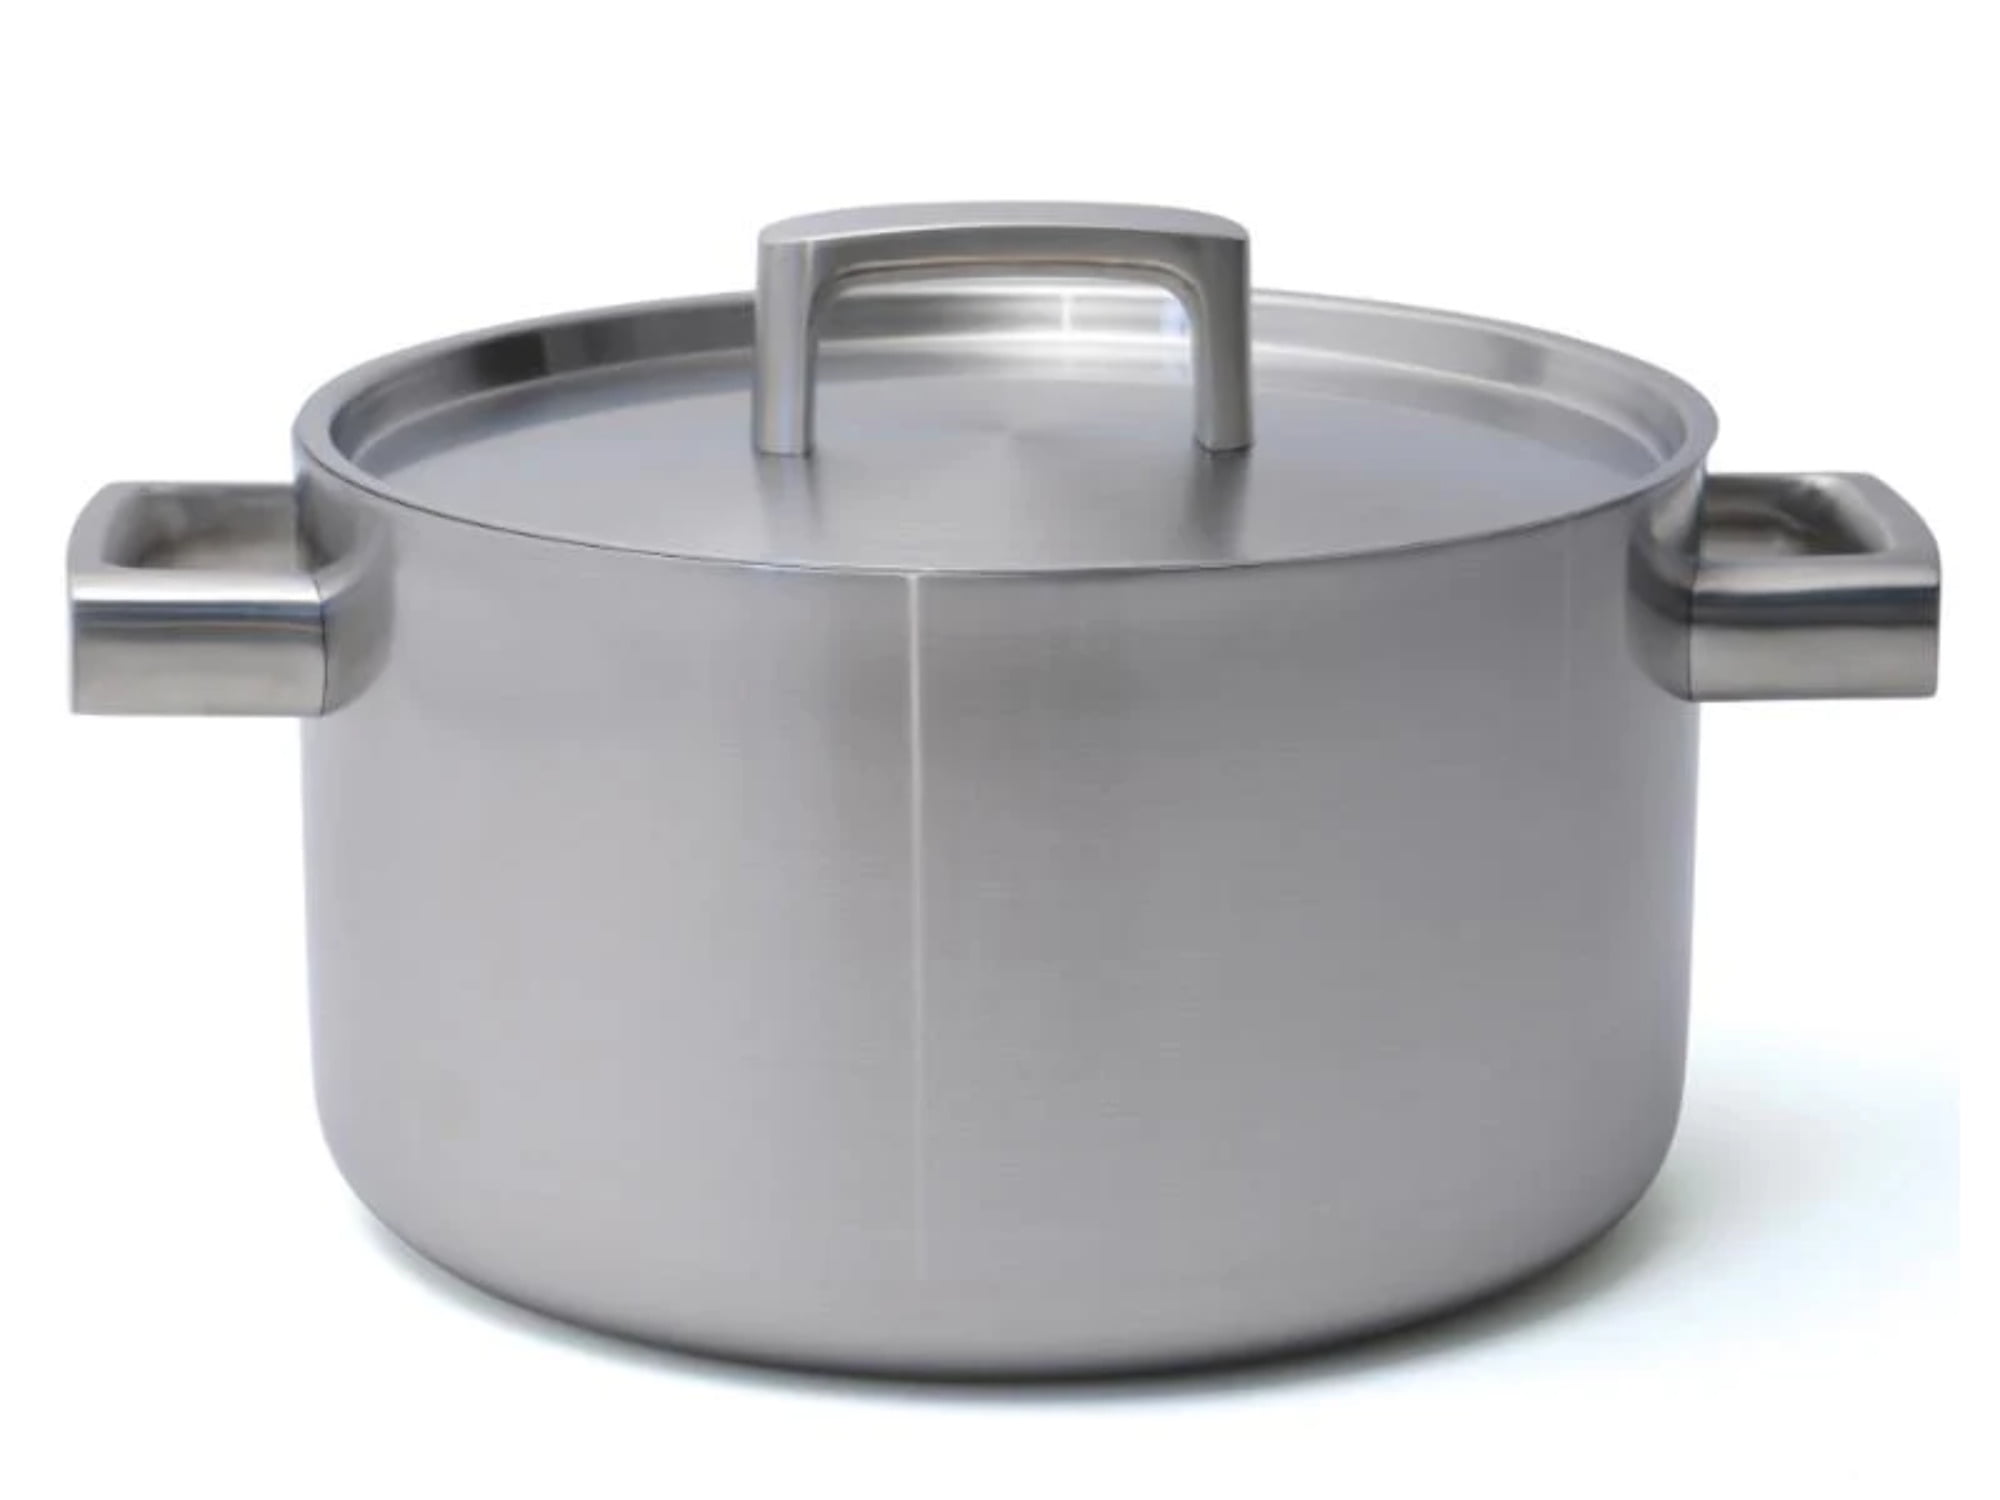 Stockpot 10 Qt Stainless Steel Commercial Tri-Ply Capsule Bottom Pot Dutch  Oven